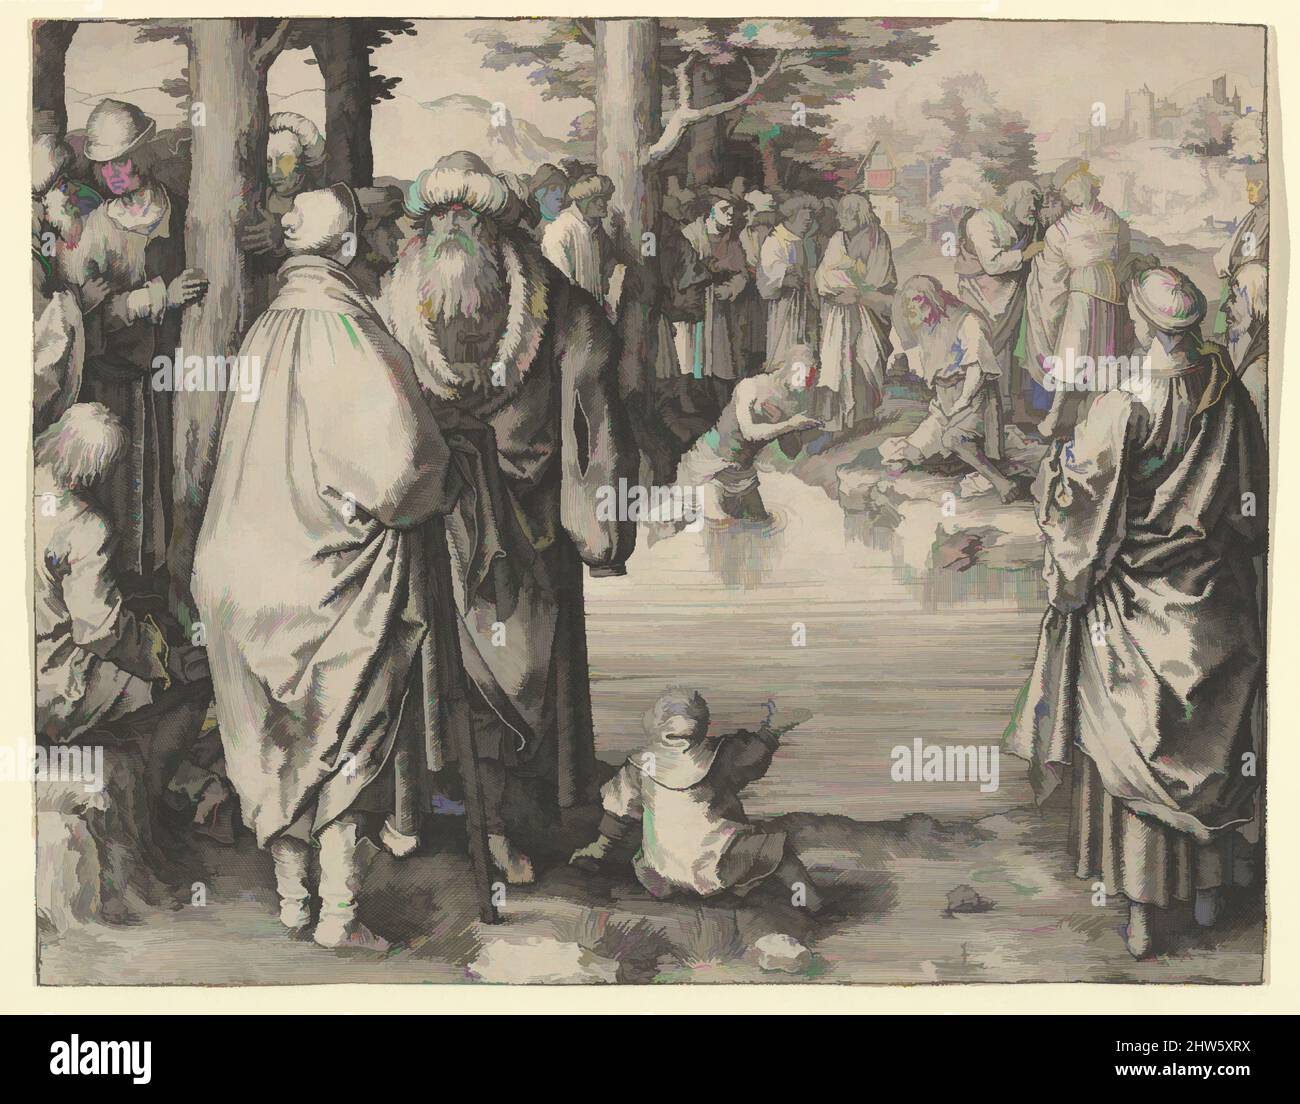 Art inspired by The Baptism of Christ in the River Jordan, ca. 1510, Engraving; first state, sheet: 5 5/8 x 7 1/4 in. (14.4 x 18.3 cm), Prints, Lucas van Leyden (Netherlandish, Leiden ca. 1494–1533 Leiden, Classic works modernized by Artotop with a splash of modernity. Shapes, color and value, eye-catching visual impact on art. Emotions through freedom of artworks in a contemporary way. A timeless message pursuing a wildly creative new direction. Artists turning to the digital medium and creating the Artotop NFT Stock Photo